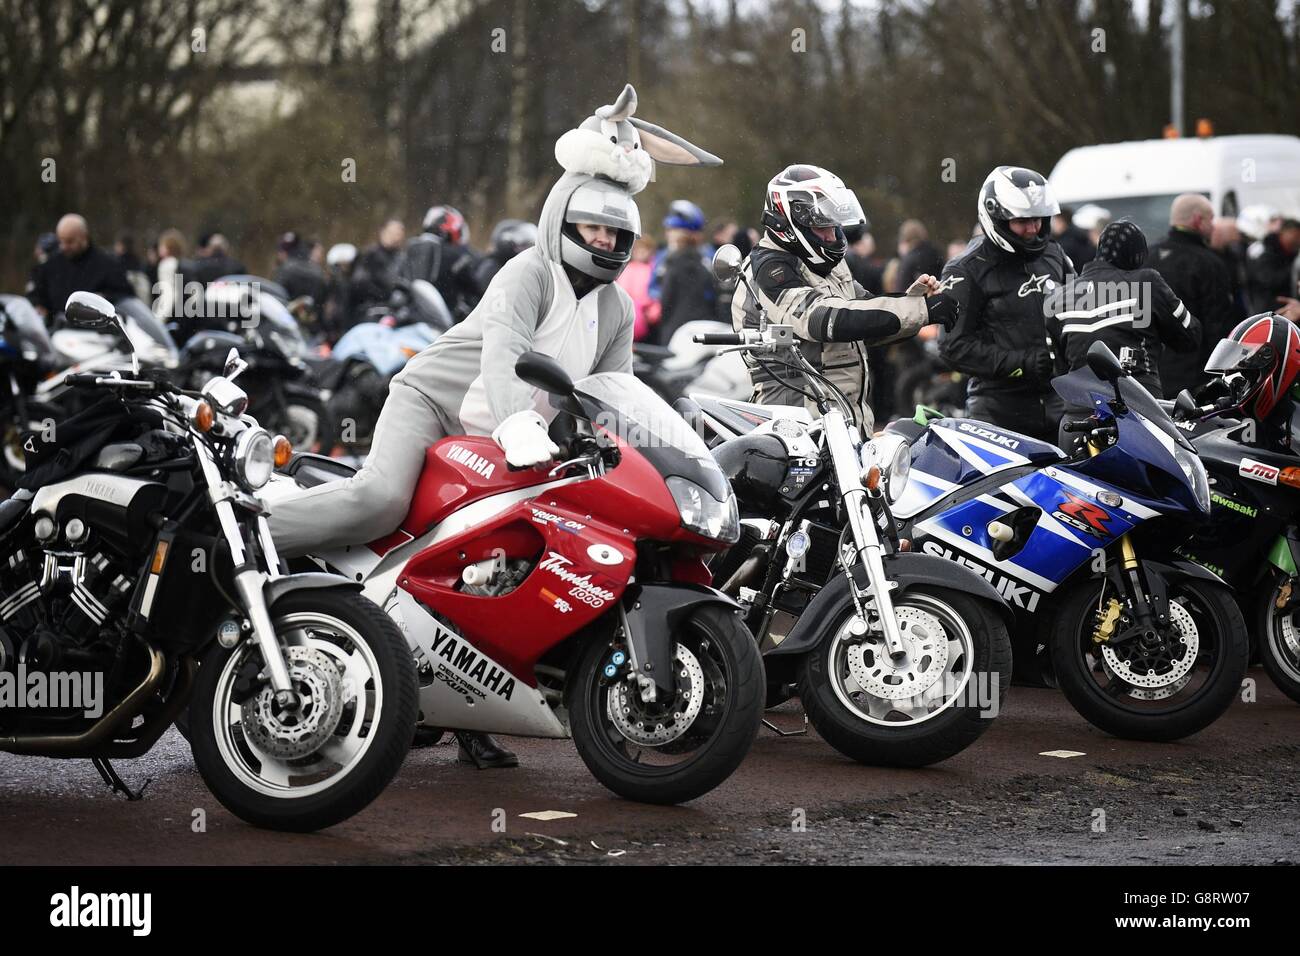 Bikers from across Scotland take part in the annual Easter Egg run event, as more than 1,000 bikers, many in fancy dress, ride in the yearly Scottish parade which raises money for Glasgow Children's Hospital Charity. Stock Photo